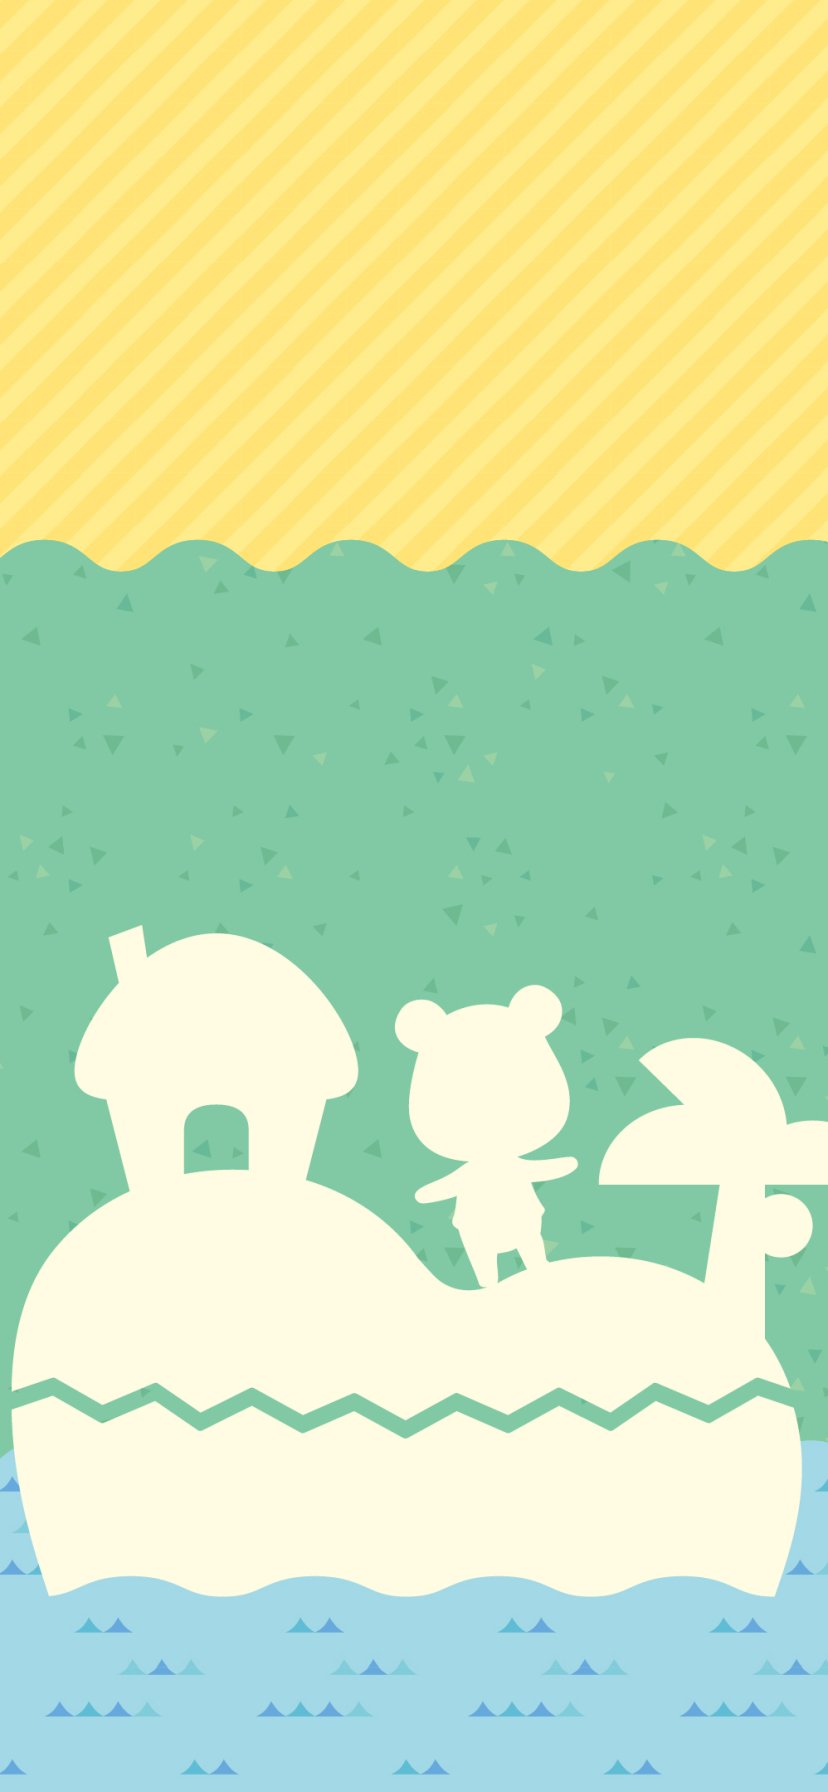 Download Animal Crossing: New Horizons wallpaper for mobile phone, free Animal Crossing: New Horizons HD picture